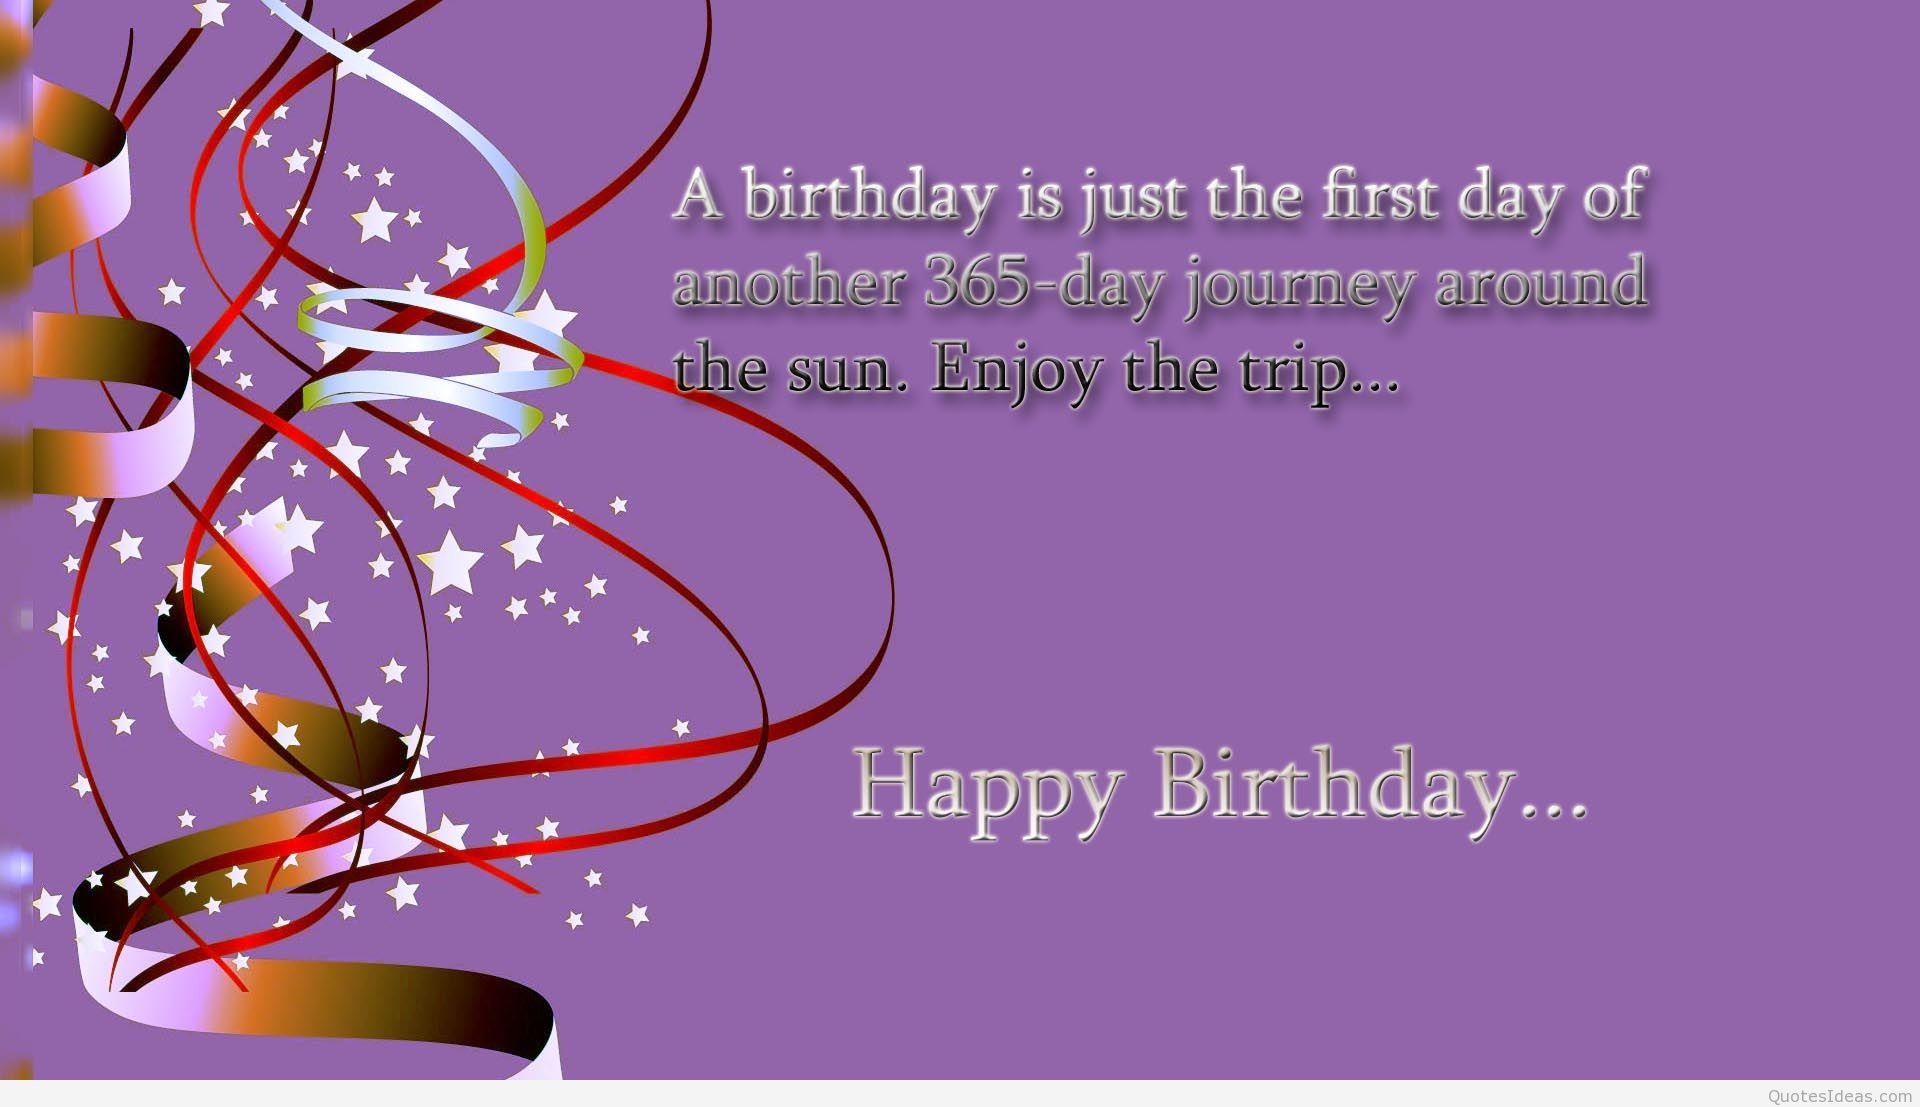 Happy birthday brother messages quotes and image